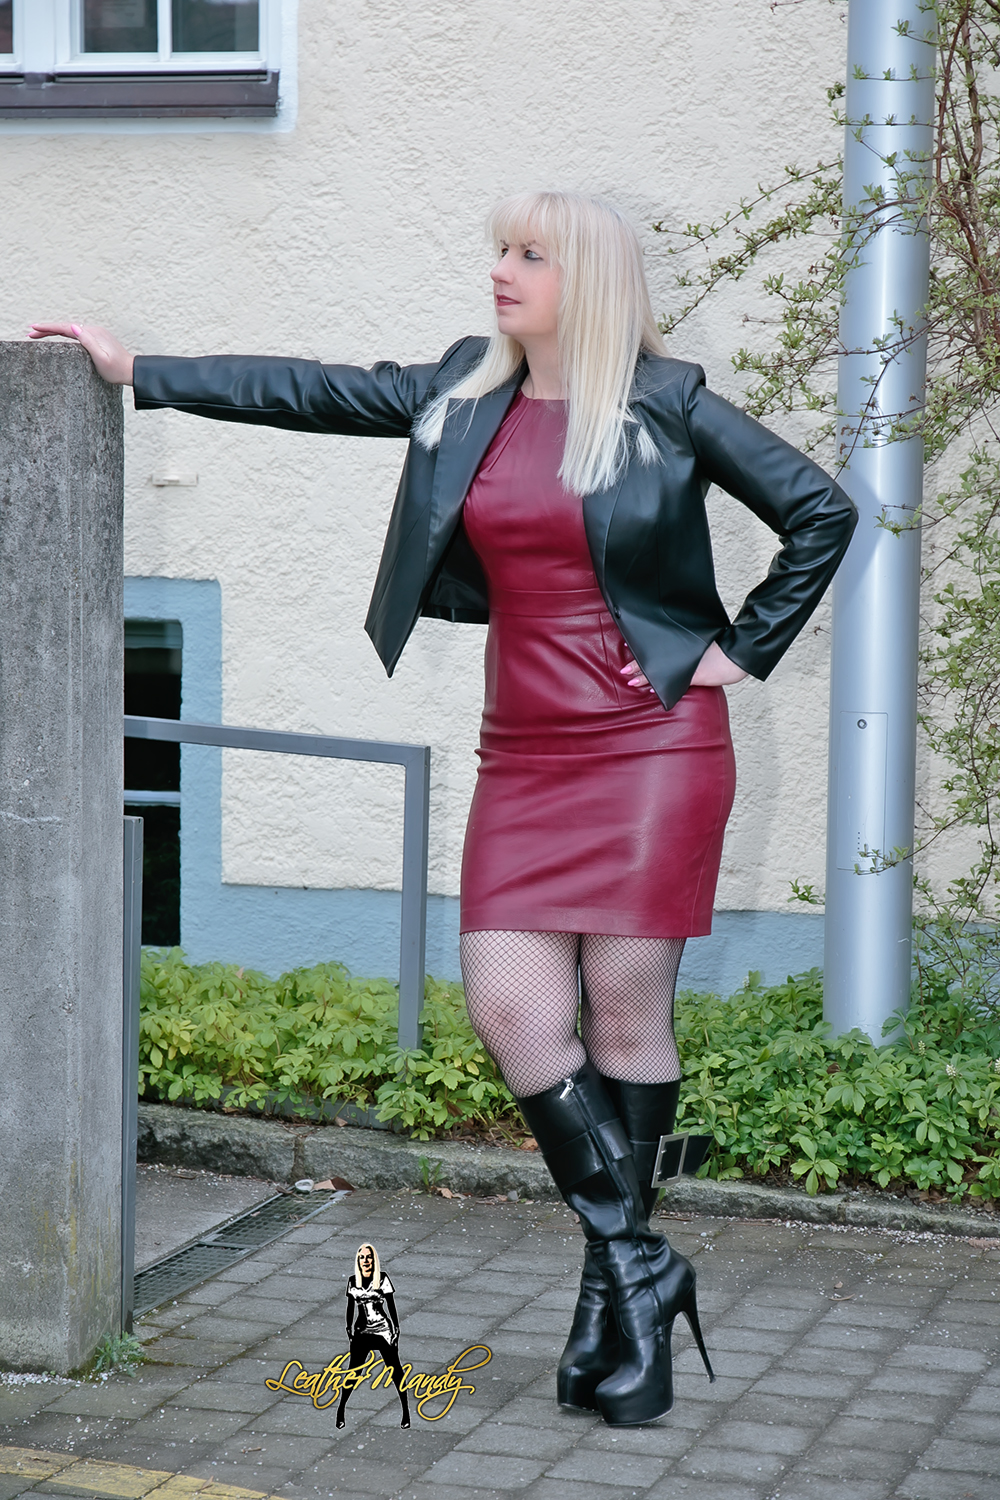 Leathermandy Preview Bild Gallery 854